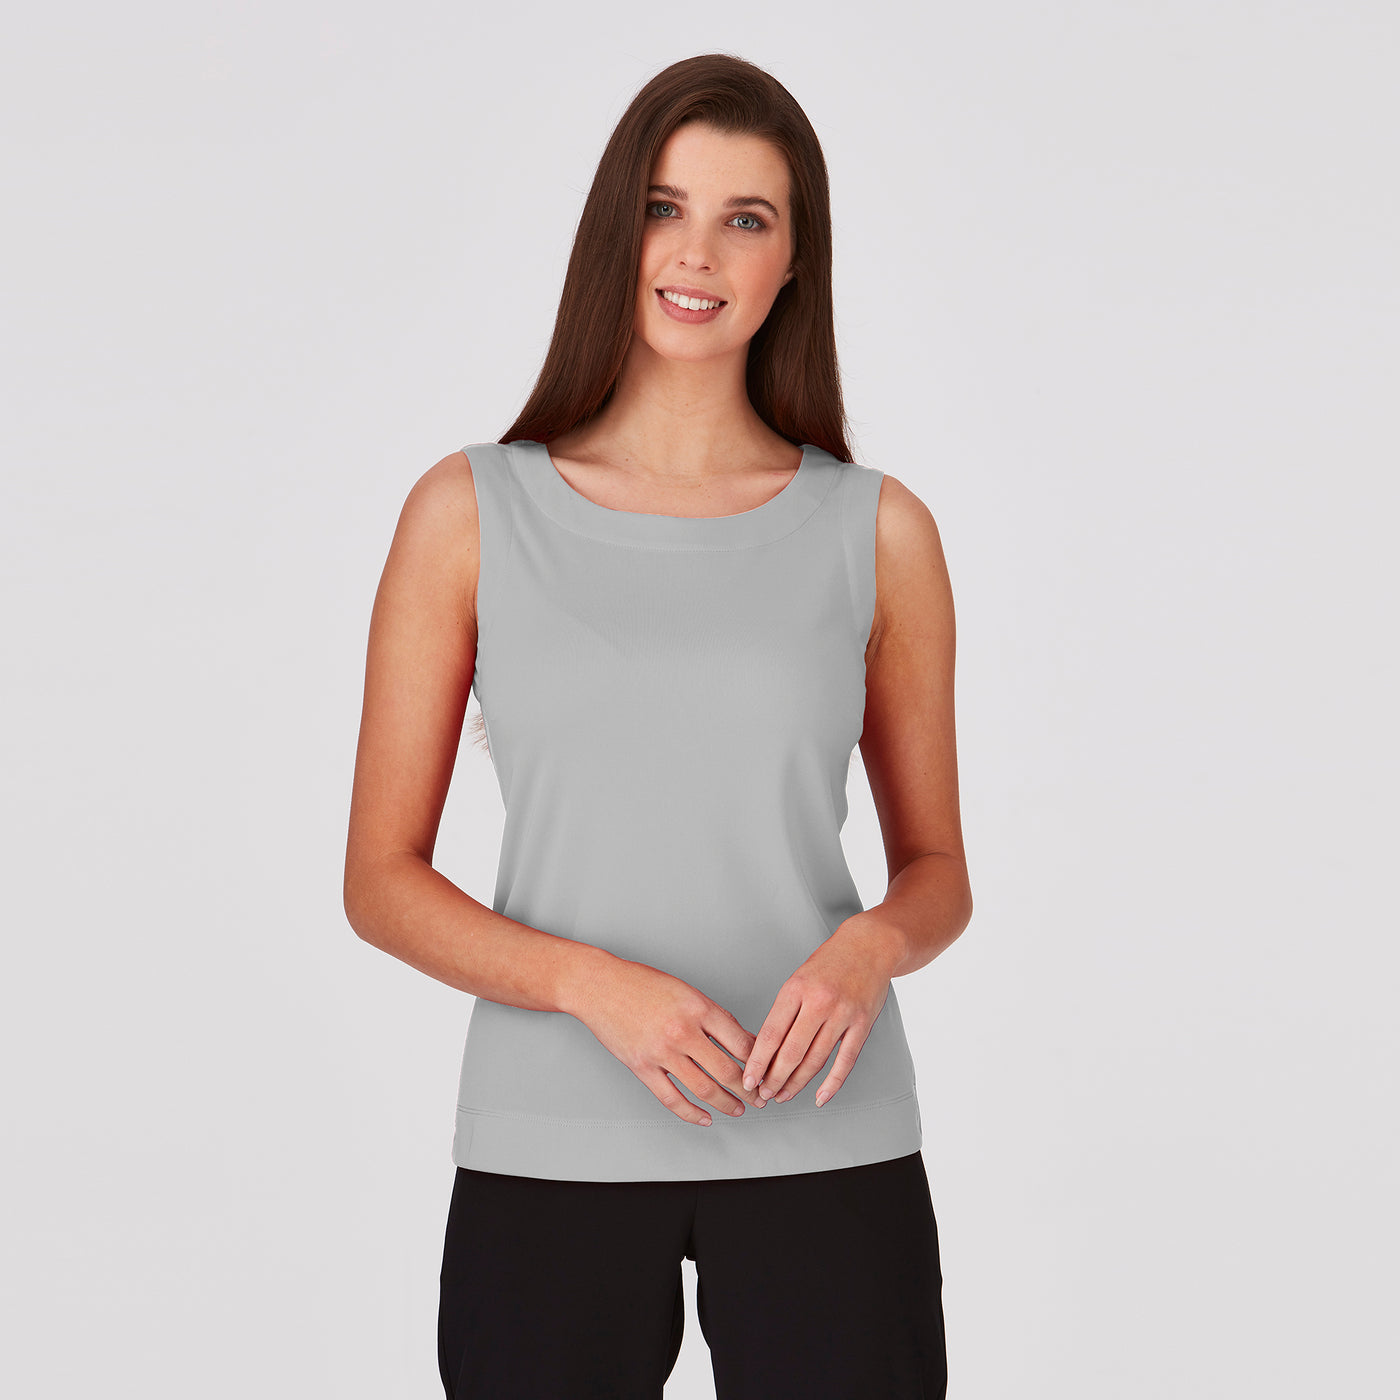 Womens City Collection Smart Knit Sleeveless Top